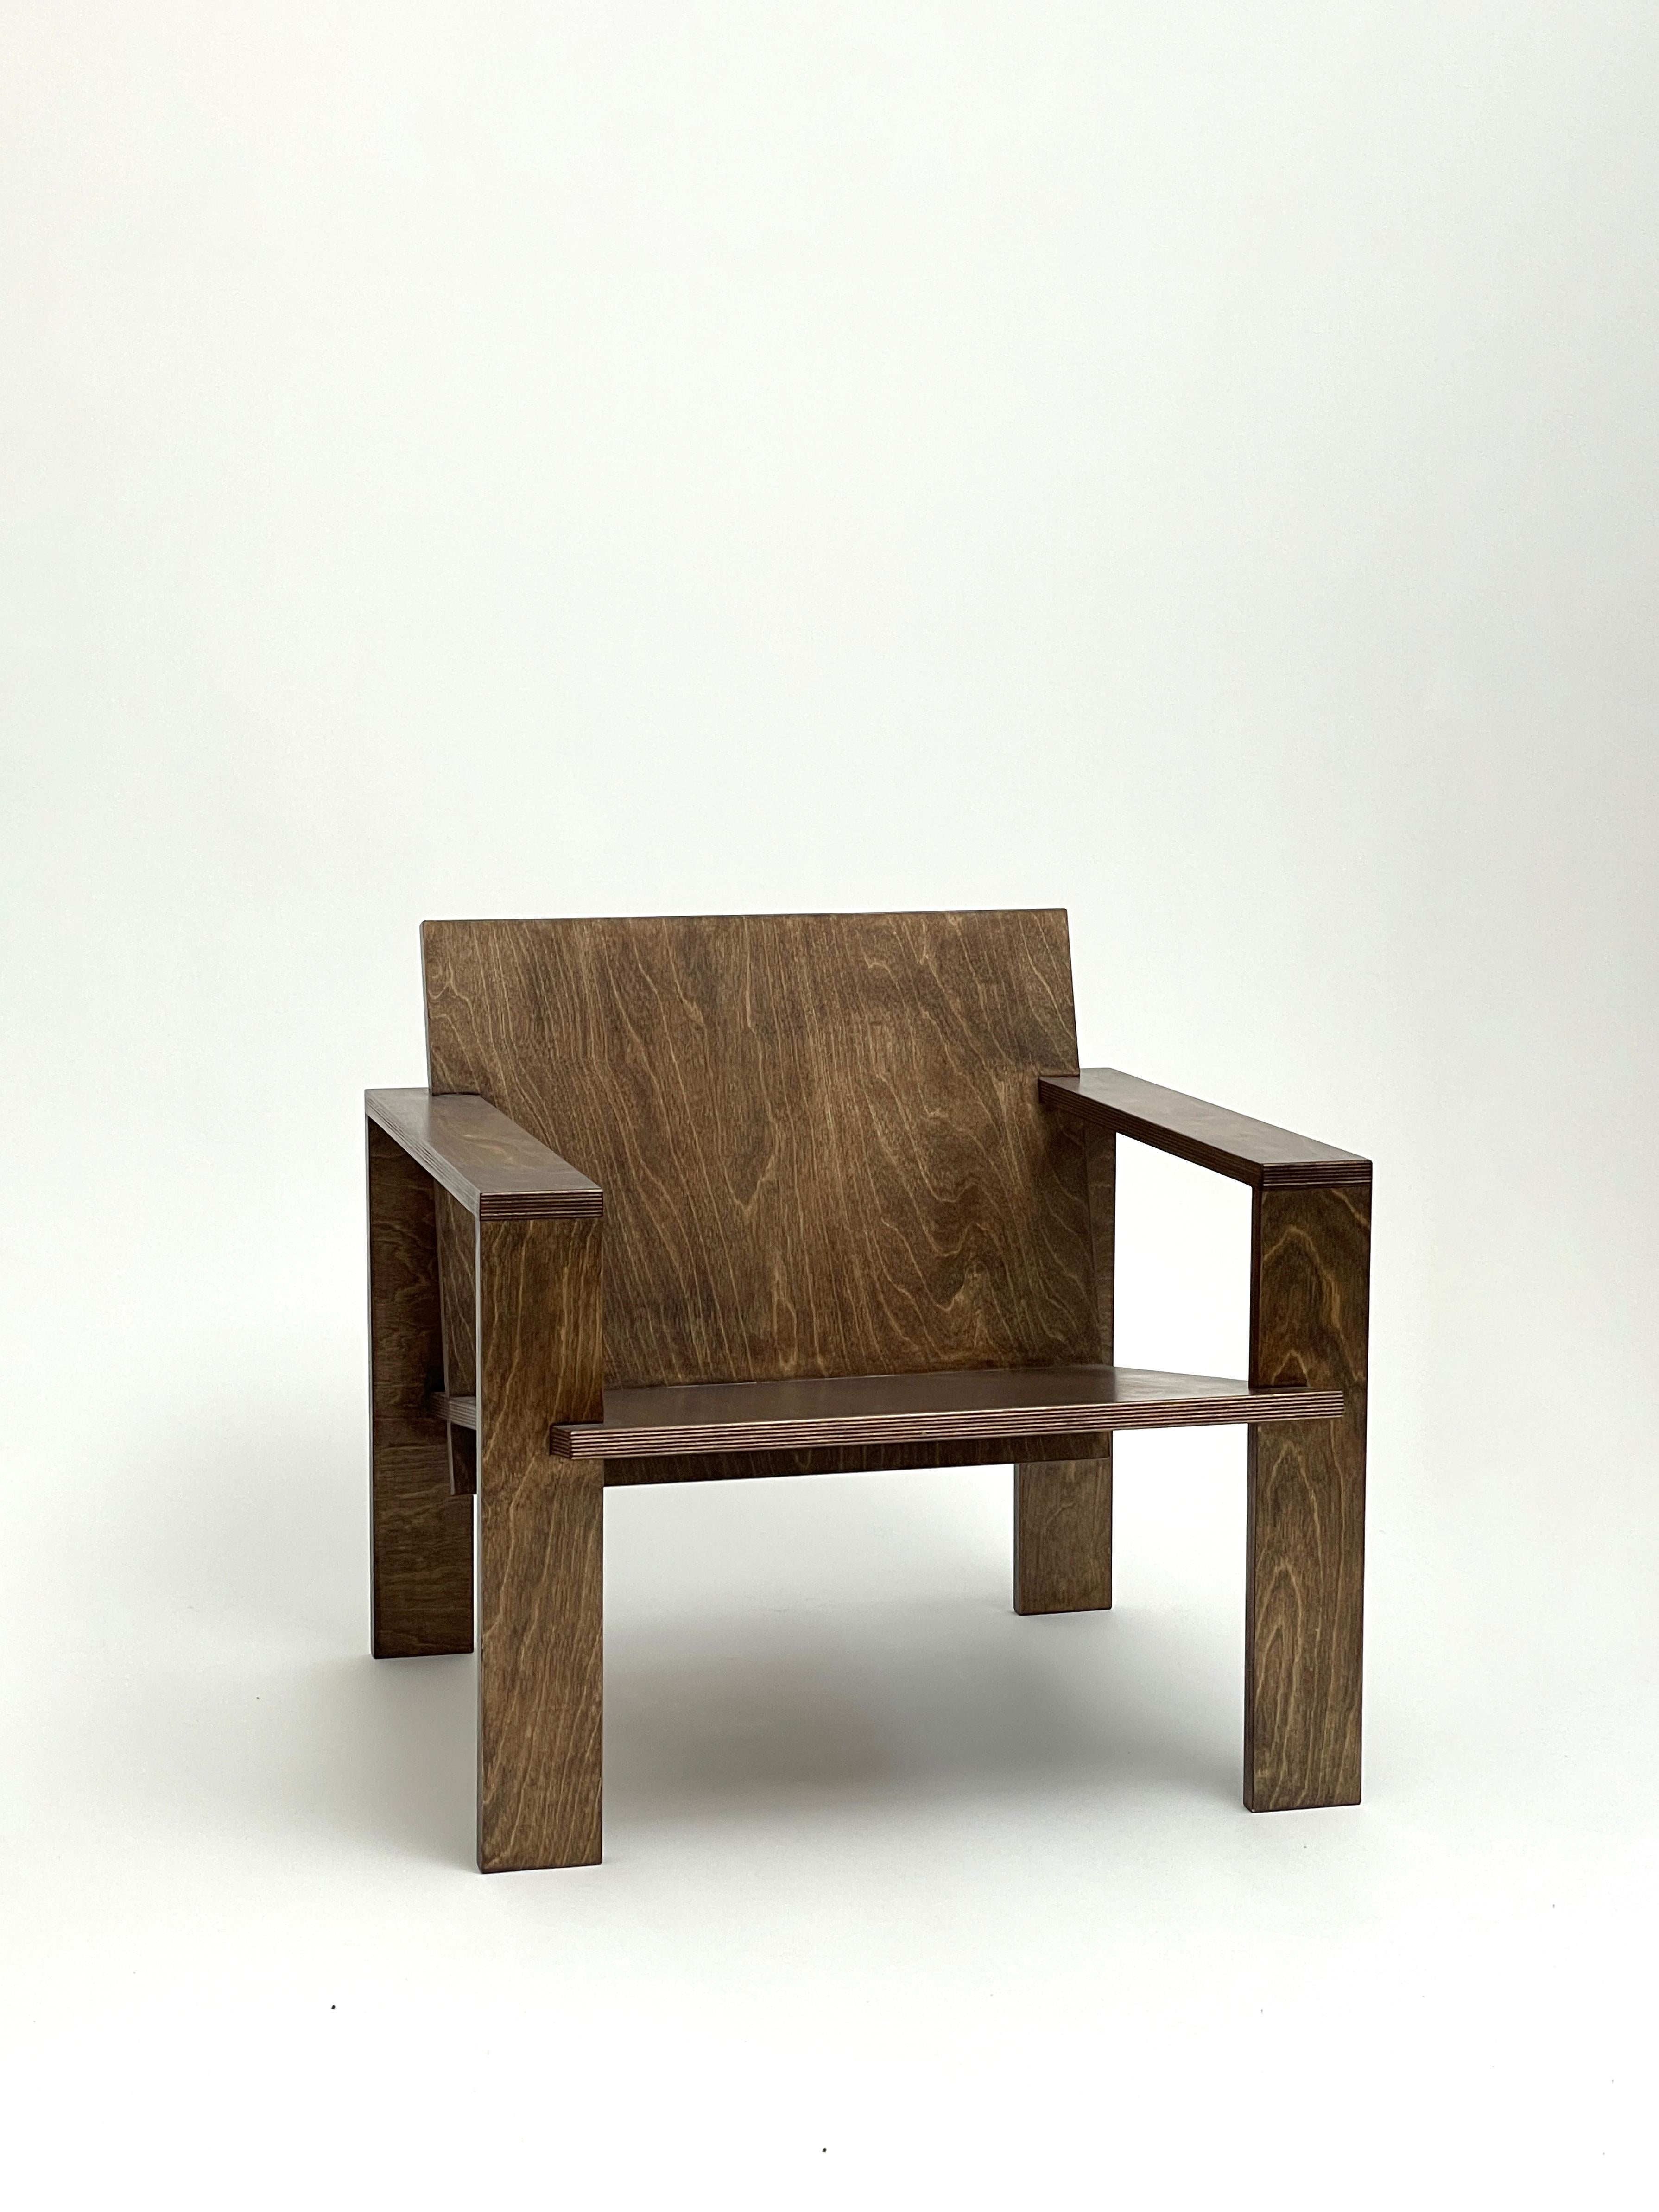 Post-Modern Lounge Chair 01 by Goons